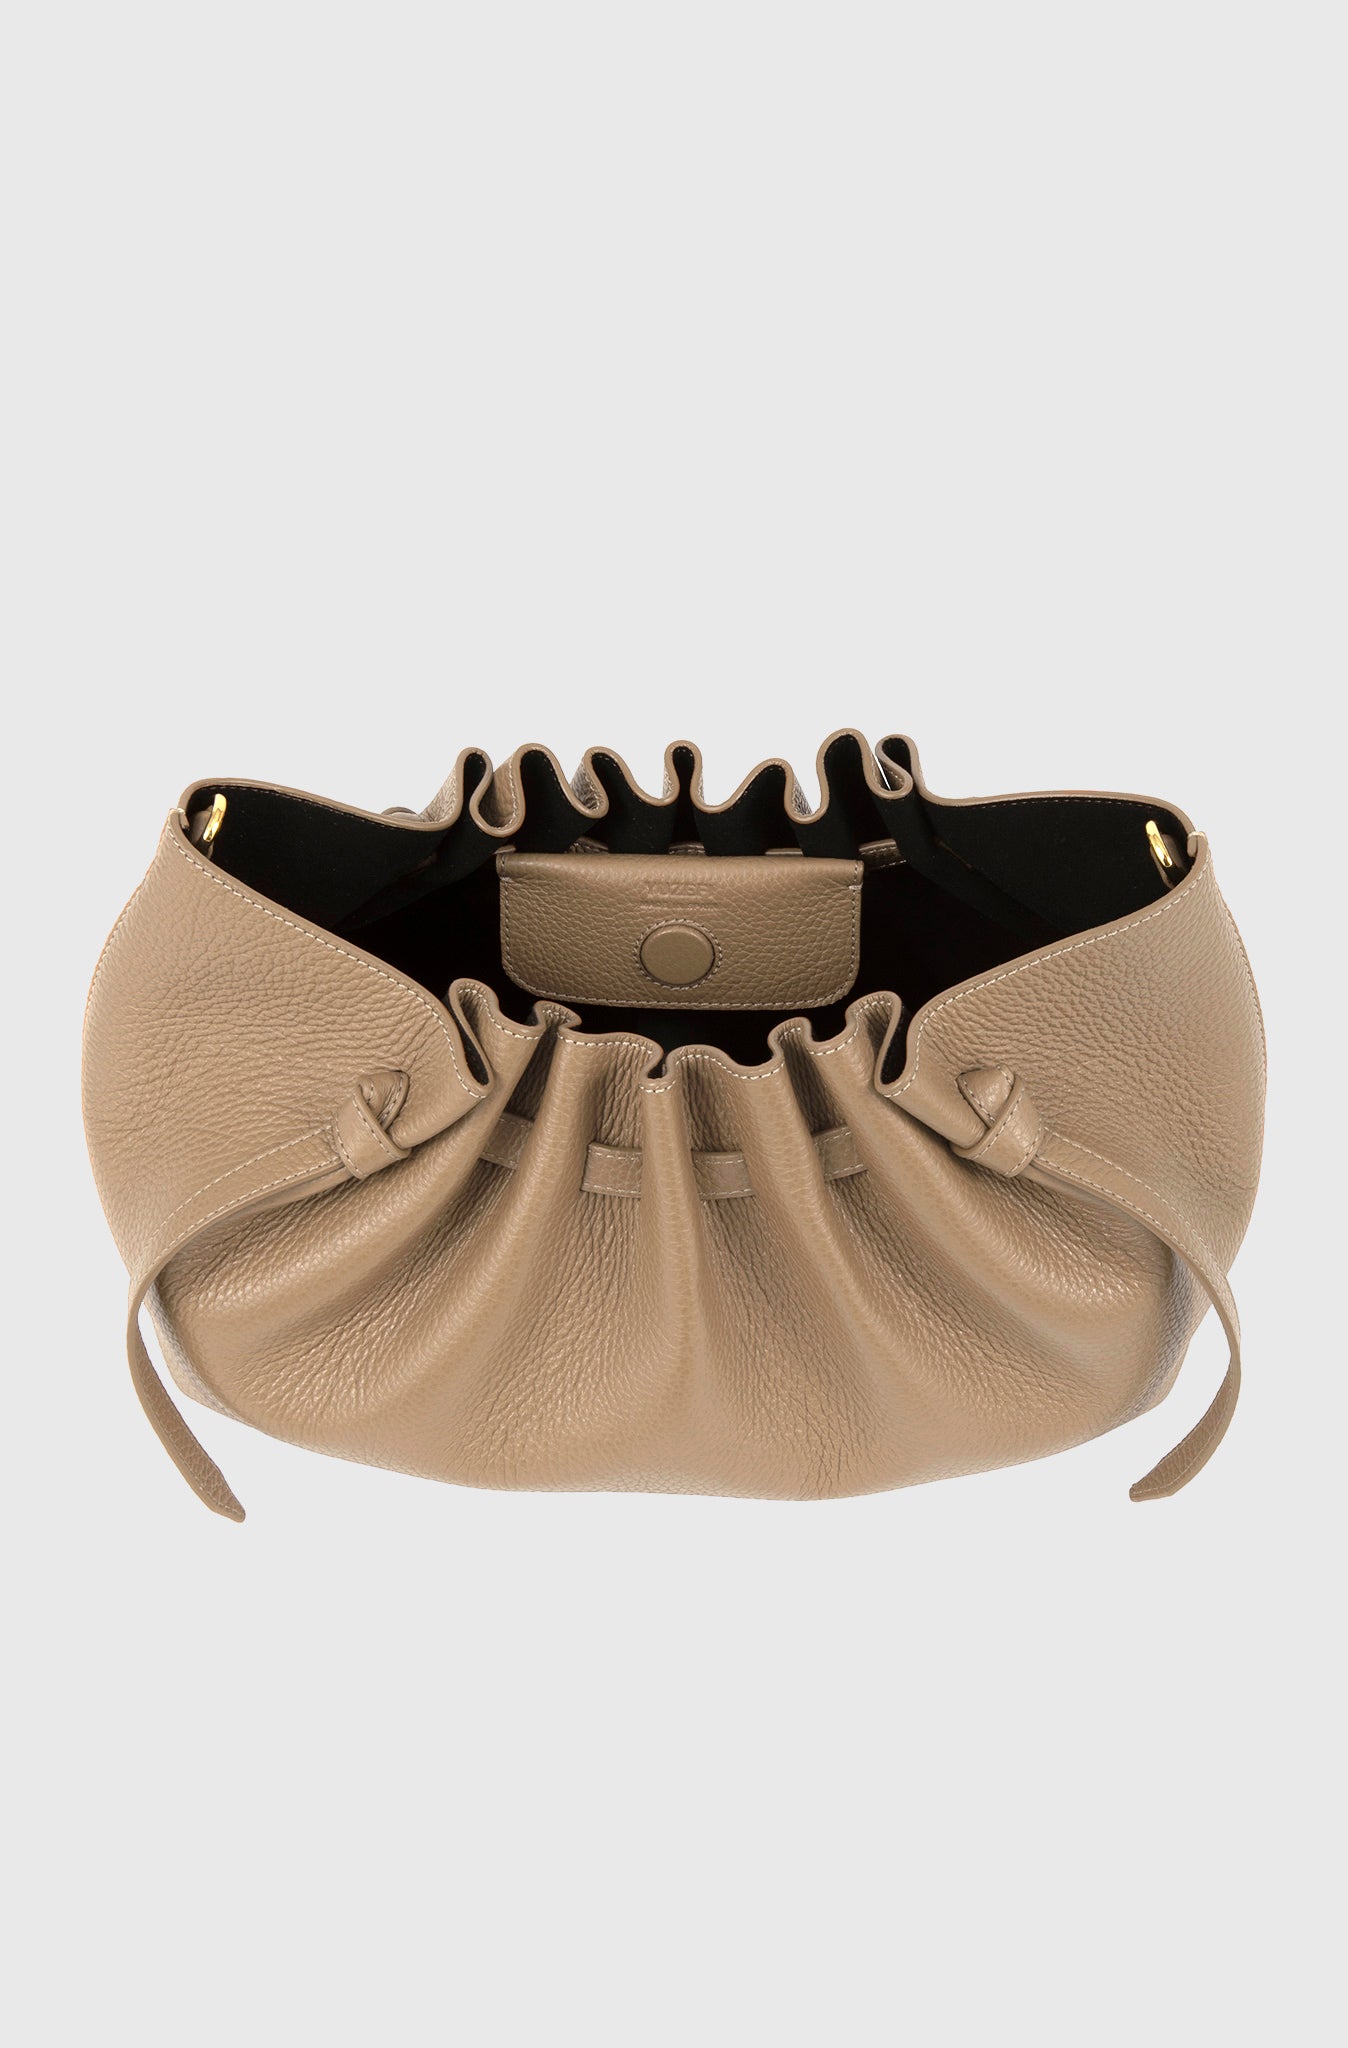 SCALLOP CLUTCH- CLAY PEBBLE GRAINED